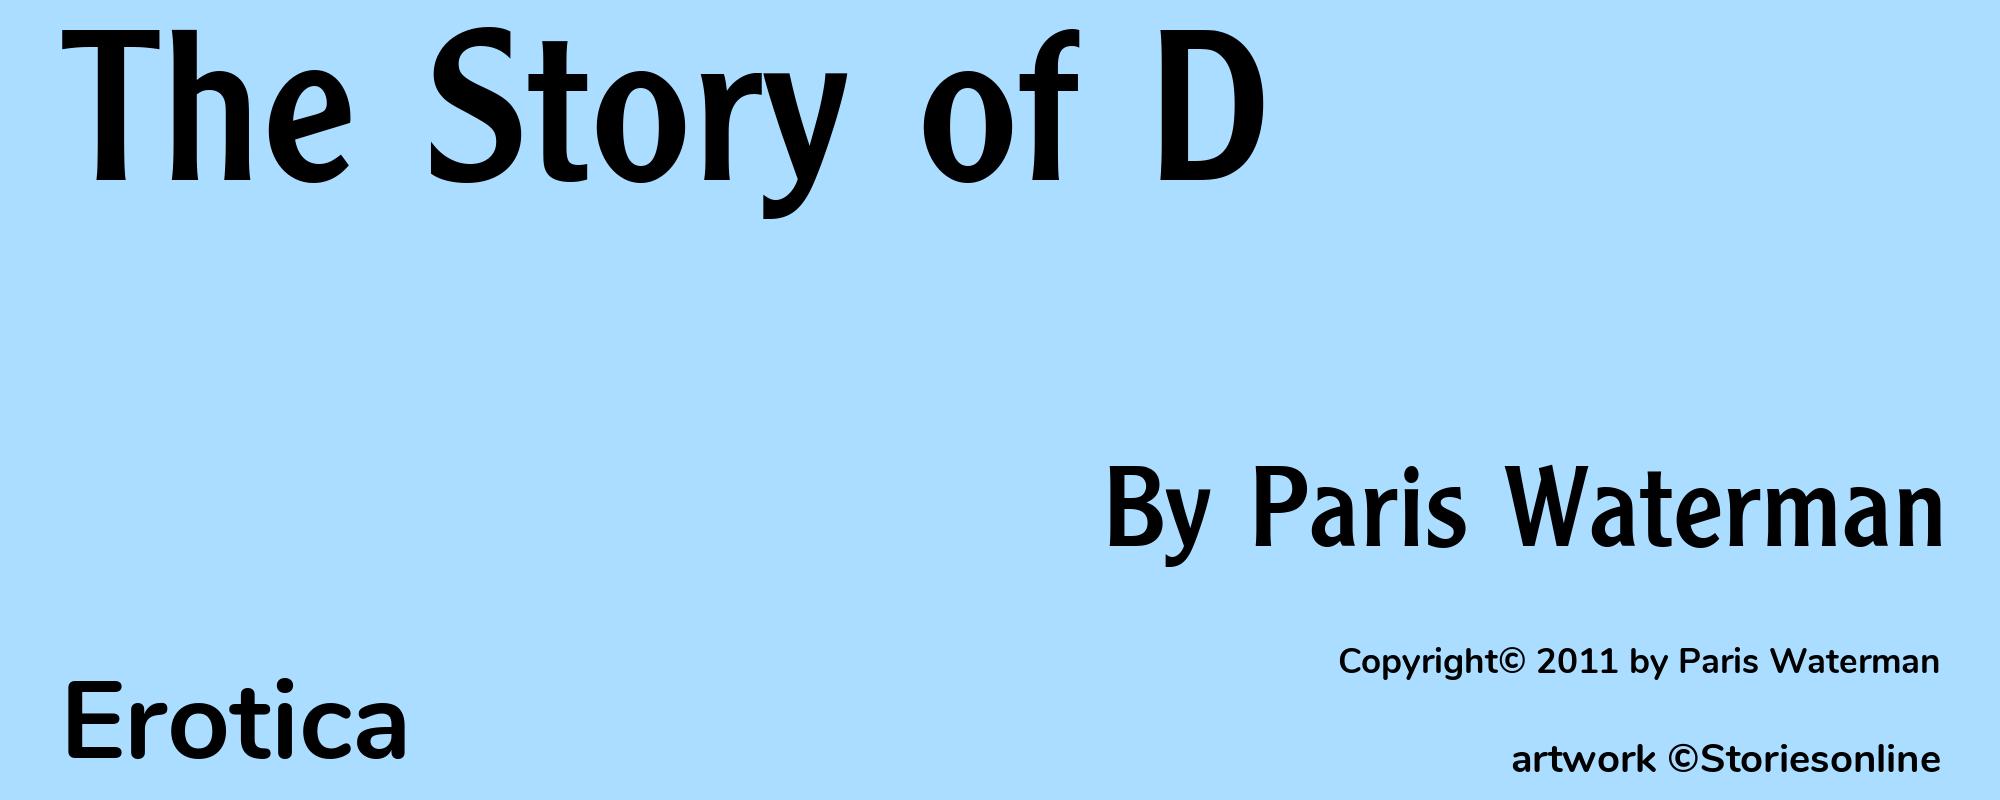 The Story of D - Cover